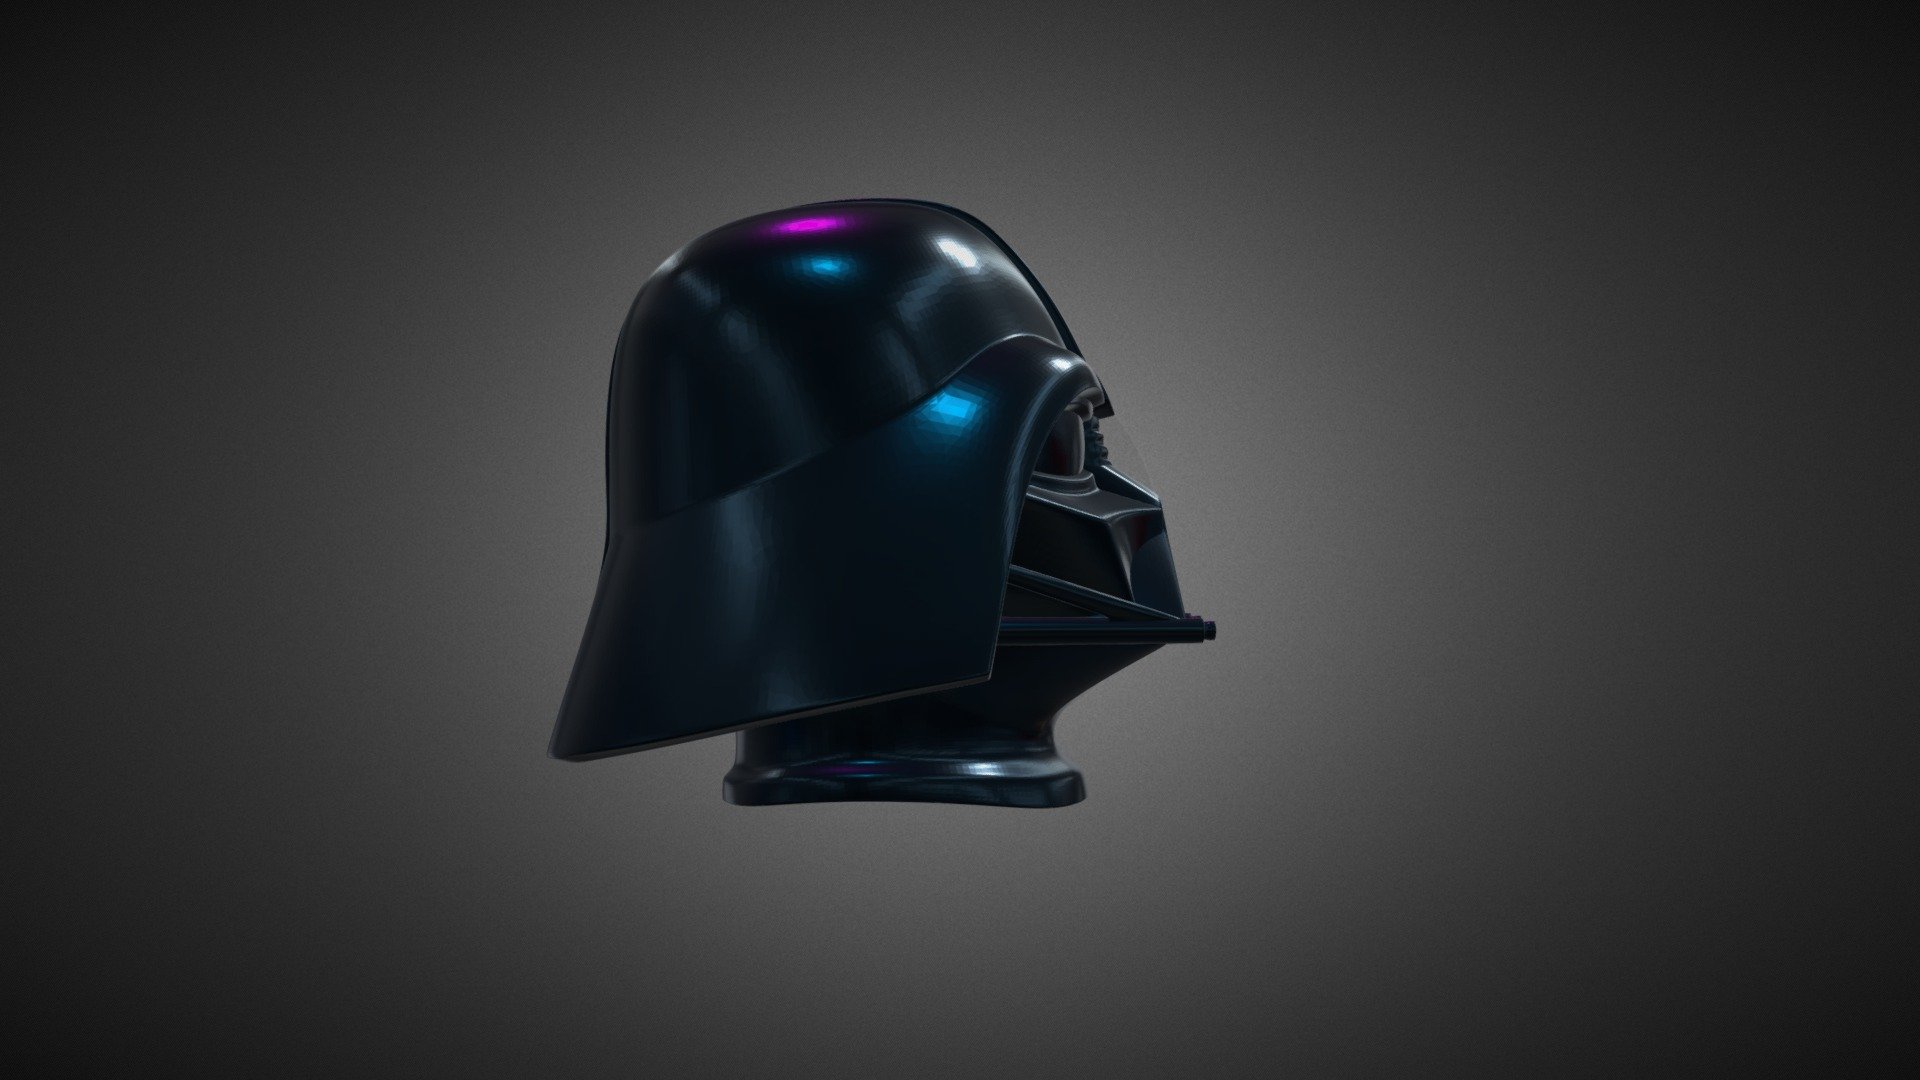 Print ready Dartn Vader Helmet.

Measure units are millimeters, it is about 5.6 cm in width.

This helmet is not optimized for using as real helmet(wearing on a head).

Mesh is manifold, no holes, no inverted faces, no bad contiguous edges.

Available formats: .blend, .stl, .obj, .fbx, .dae

Here is two versions of the model:

1) Darth_sld. (blend, .obj, .fbx, .dae. stl) This file contains the solid version of the model. Here is 116220 triangular faces.

2) Darth_hlw. (blend, .obj, .fbx, .dae. stl) This file contains the hollow version of the head. Here is 123282 triangular faces. Wall thickness varies from 2.3 to 1.5 mm in different places 3d model